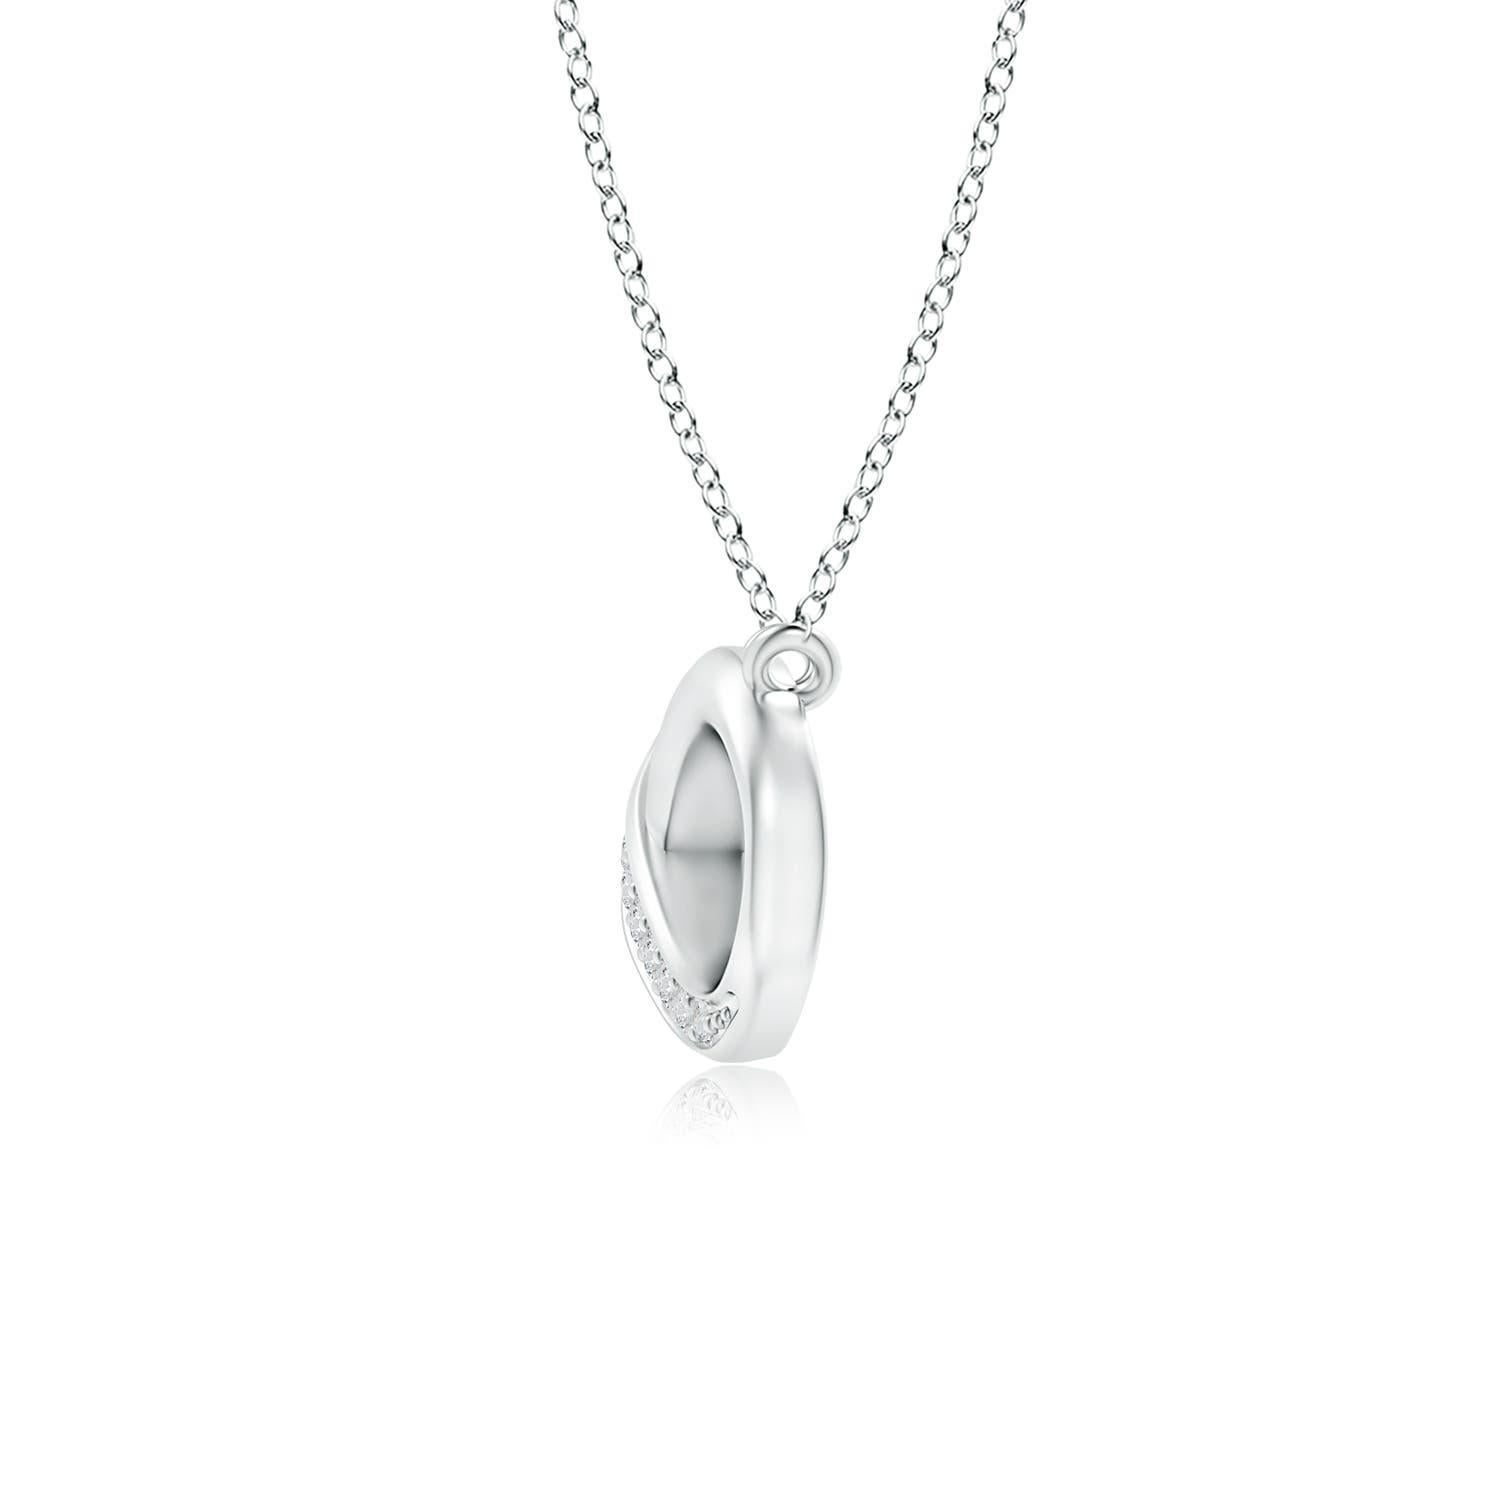 This classic infinity loop pendant, held horizontally by a hidden bale, looks impeccably exquisite. Sparkling diamonds partly accentuate the stunning infinity frame, offering a hint of sparkle. This beautiful symbol of never-ending love is crafted